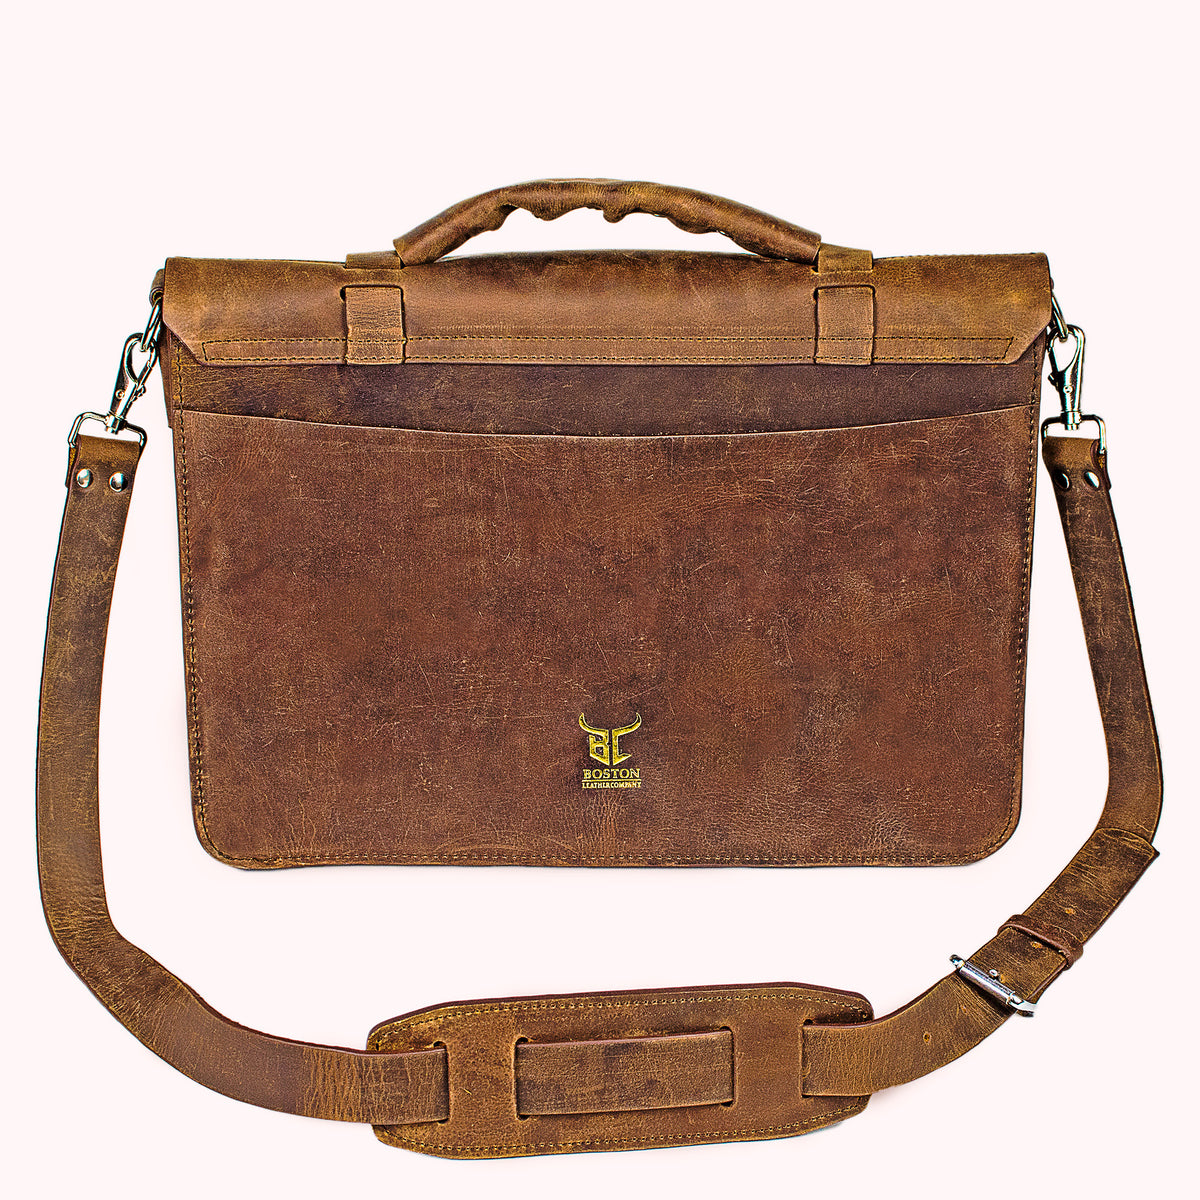 Ultra High Quality 4mm Leather Luxury Classic Messenger Bag in English Tan- Two Compartments For Laptop ipad Office